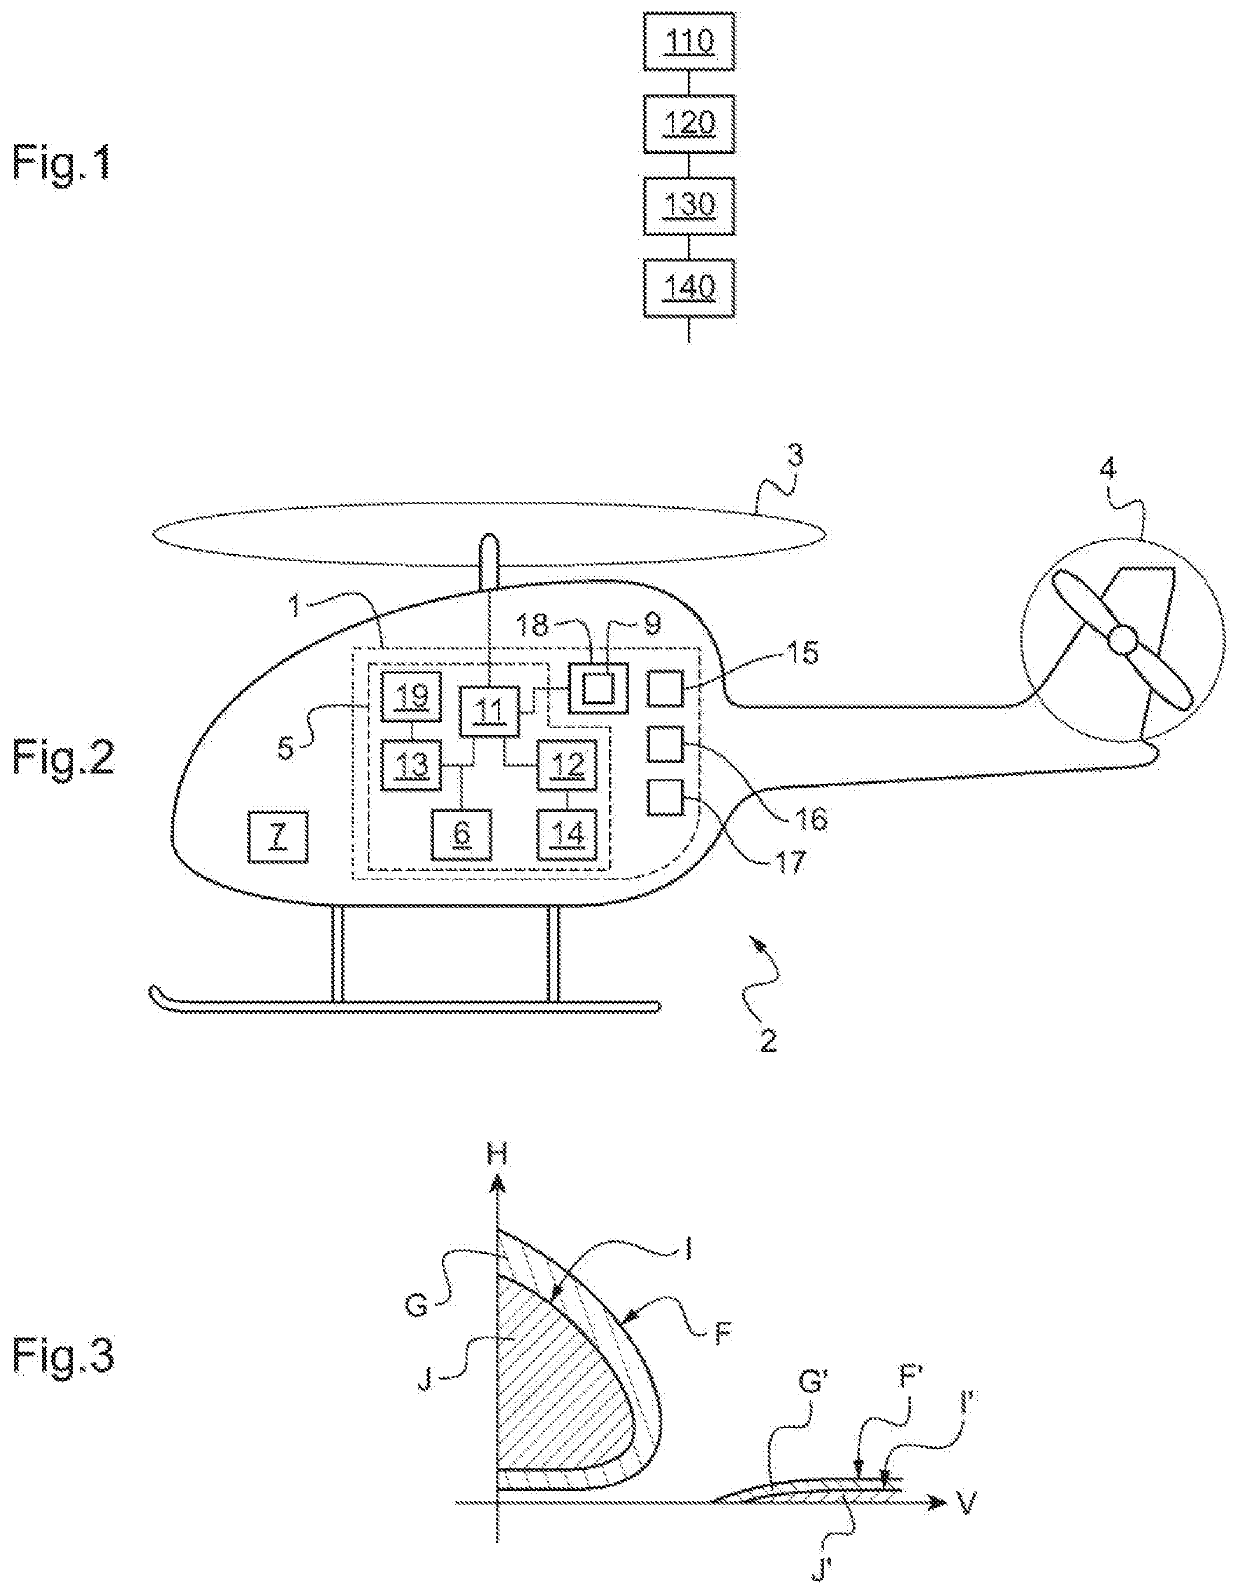 Method for assisting a single-engine rotorcraft during an engine failure